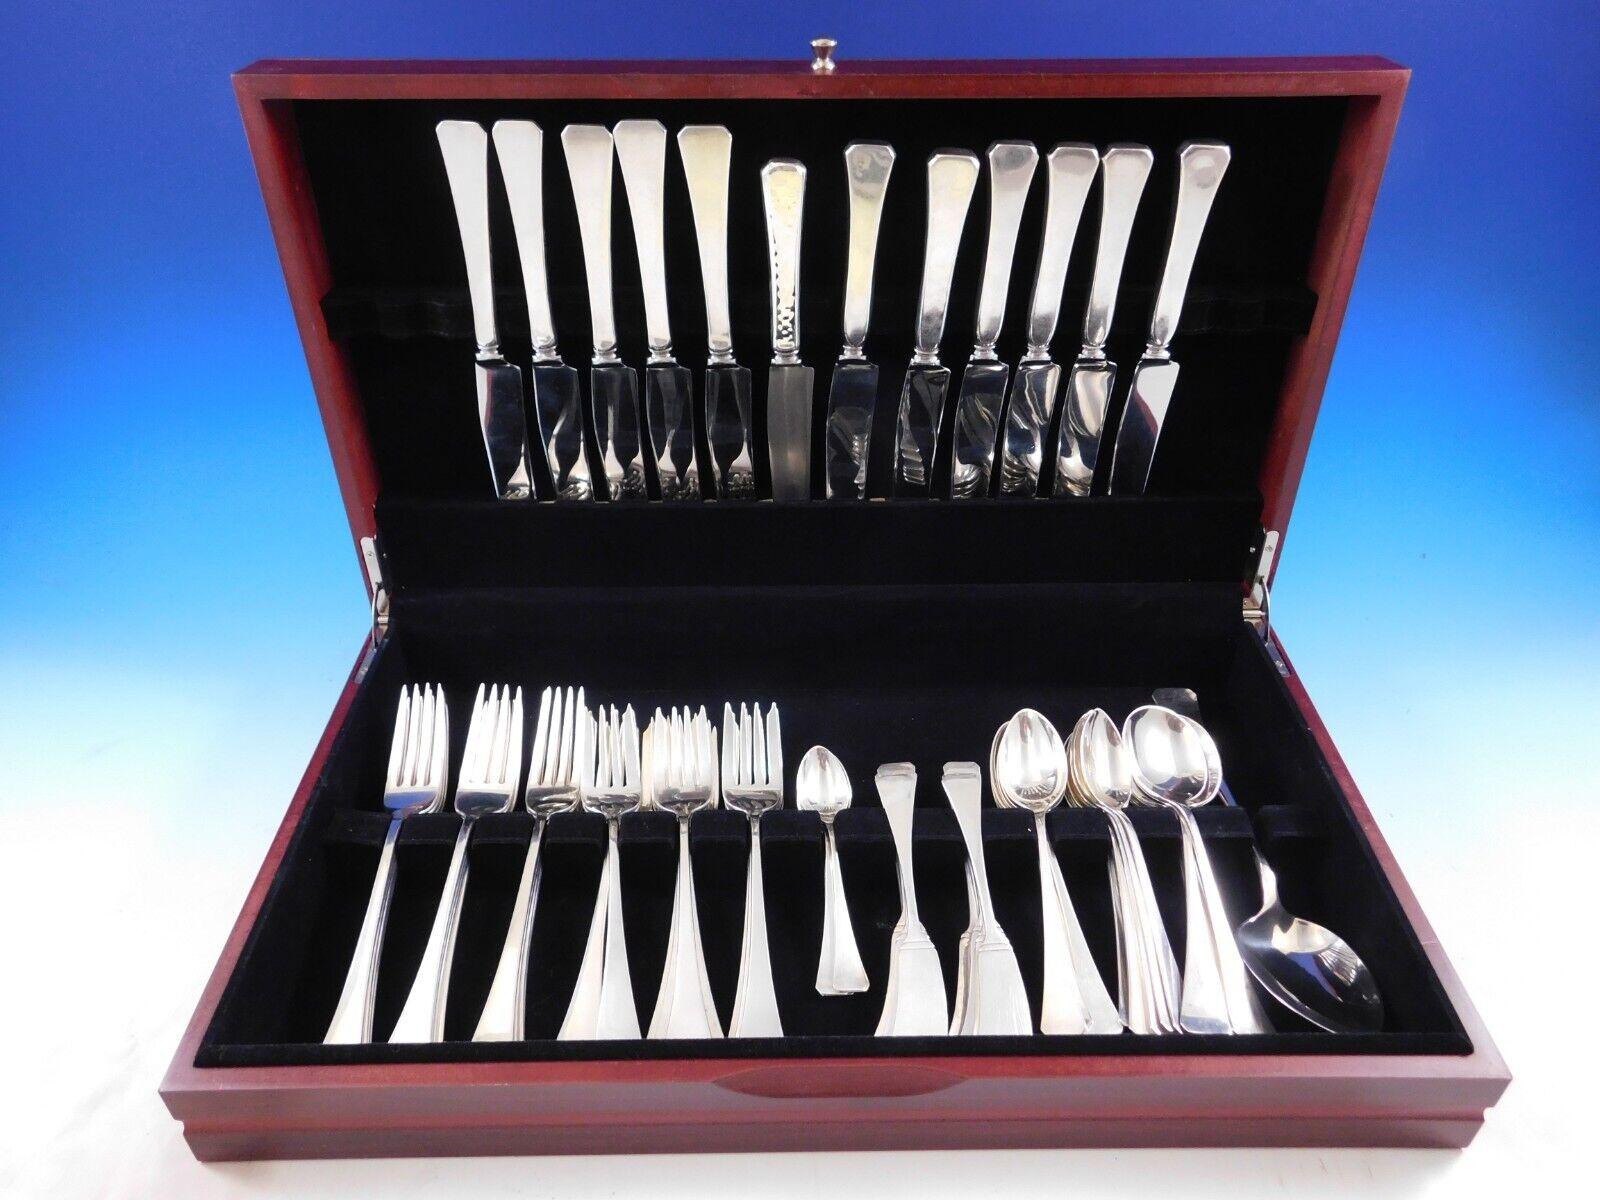 Dinner size square (formerly Cornwallace) by Allan Adler & Blanchard hand-made sterling silver flatware set - 74 pieces. This set has a subtle hand hammered finish and includes:
12 Dinner Knives, 9 1/8